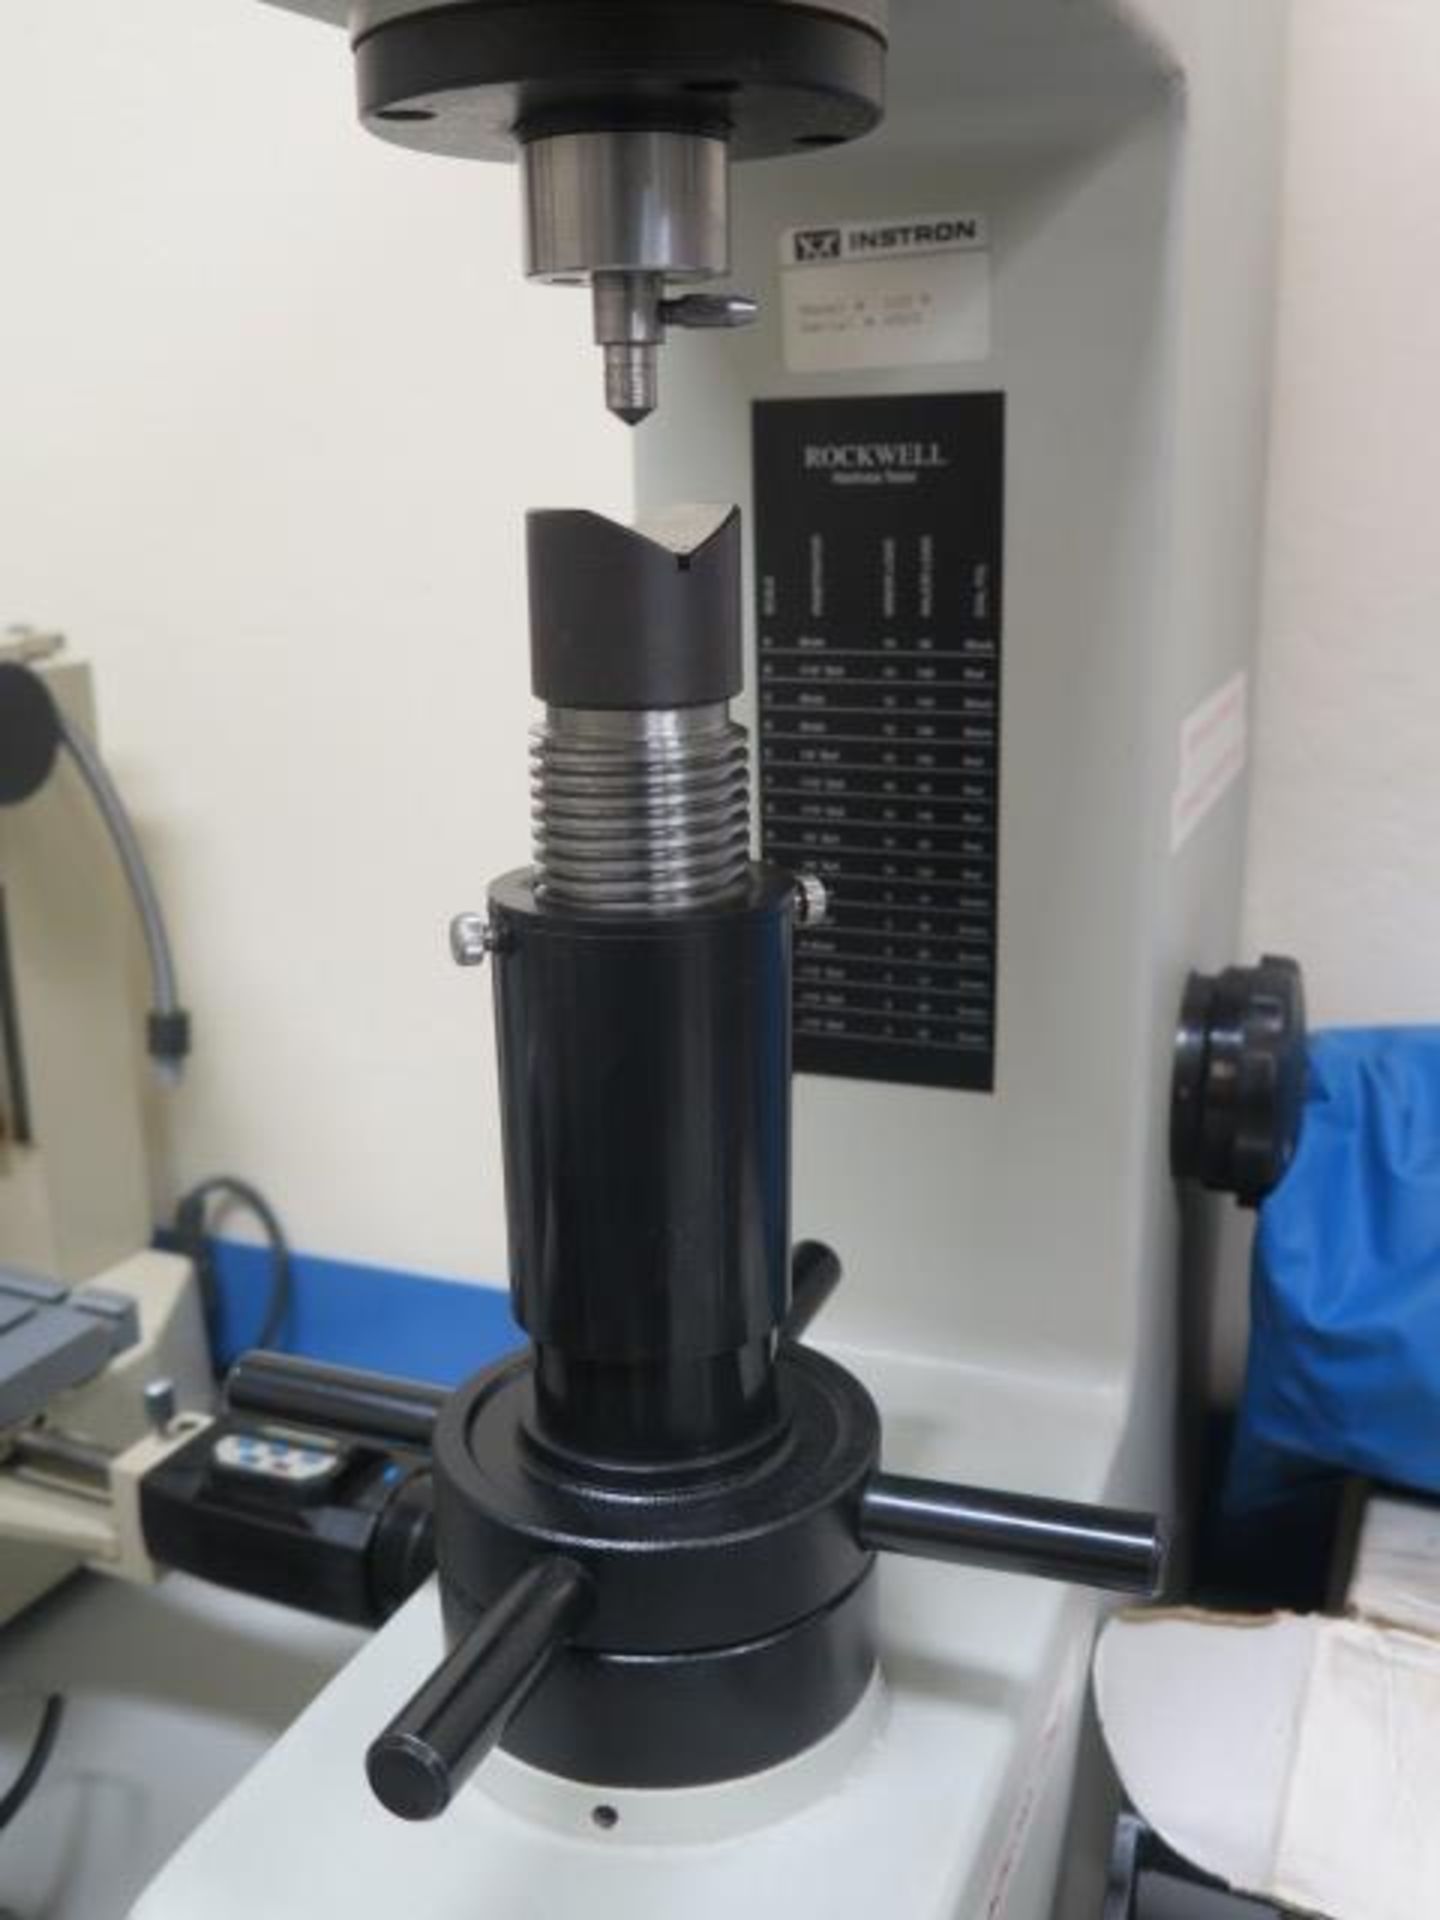 Wilson Instron mdl. 103R Rockwell Hardness Tester s/n 2523 (SOLD AS-IS - NO WARRANTY) - Image 3 of 7